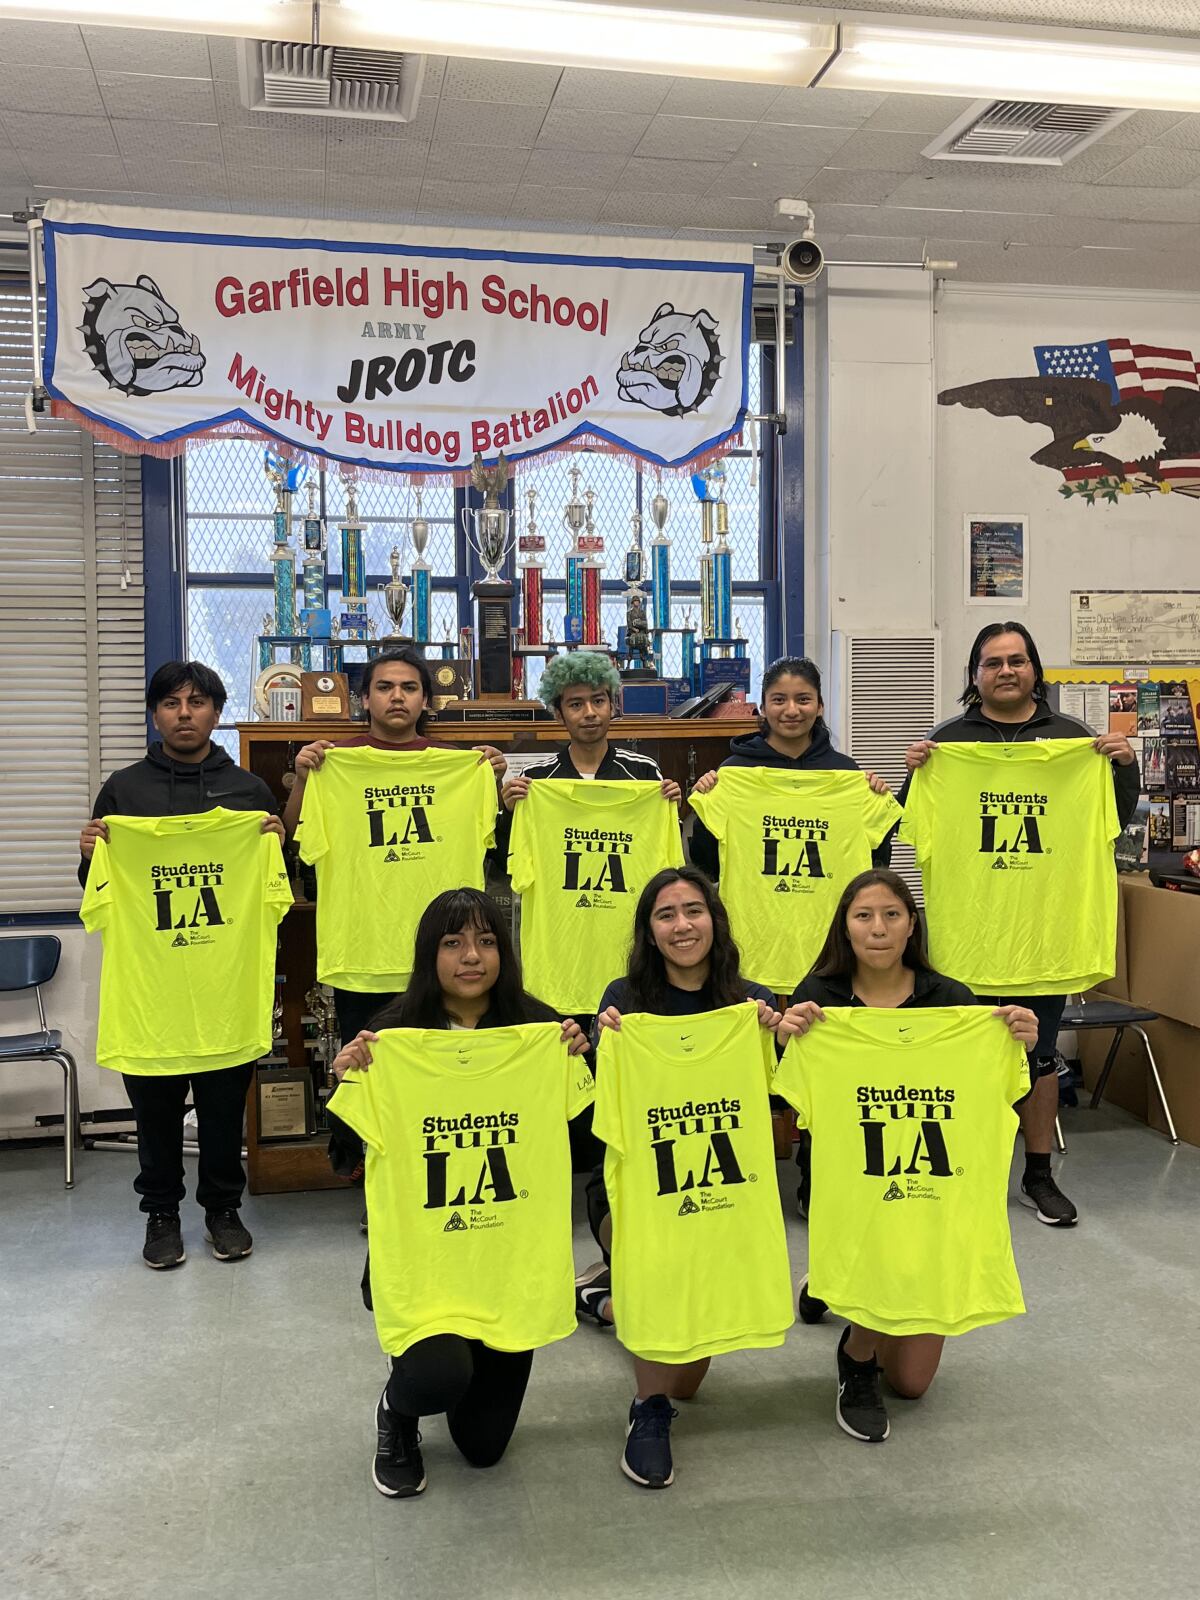 Part of the Garfield High team received their uniforms last Saturday before the Marathon.